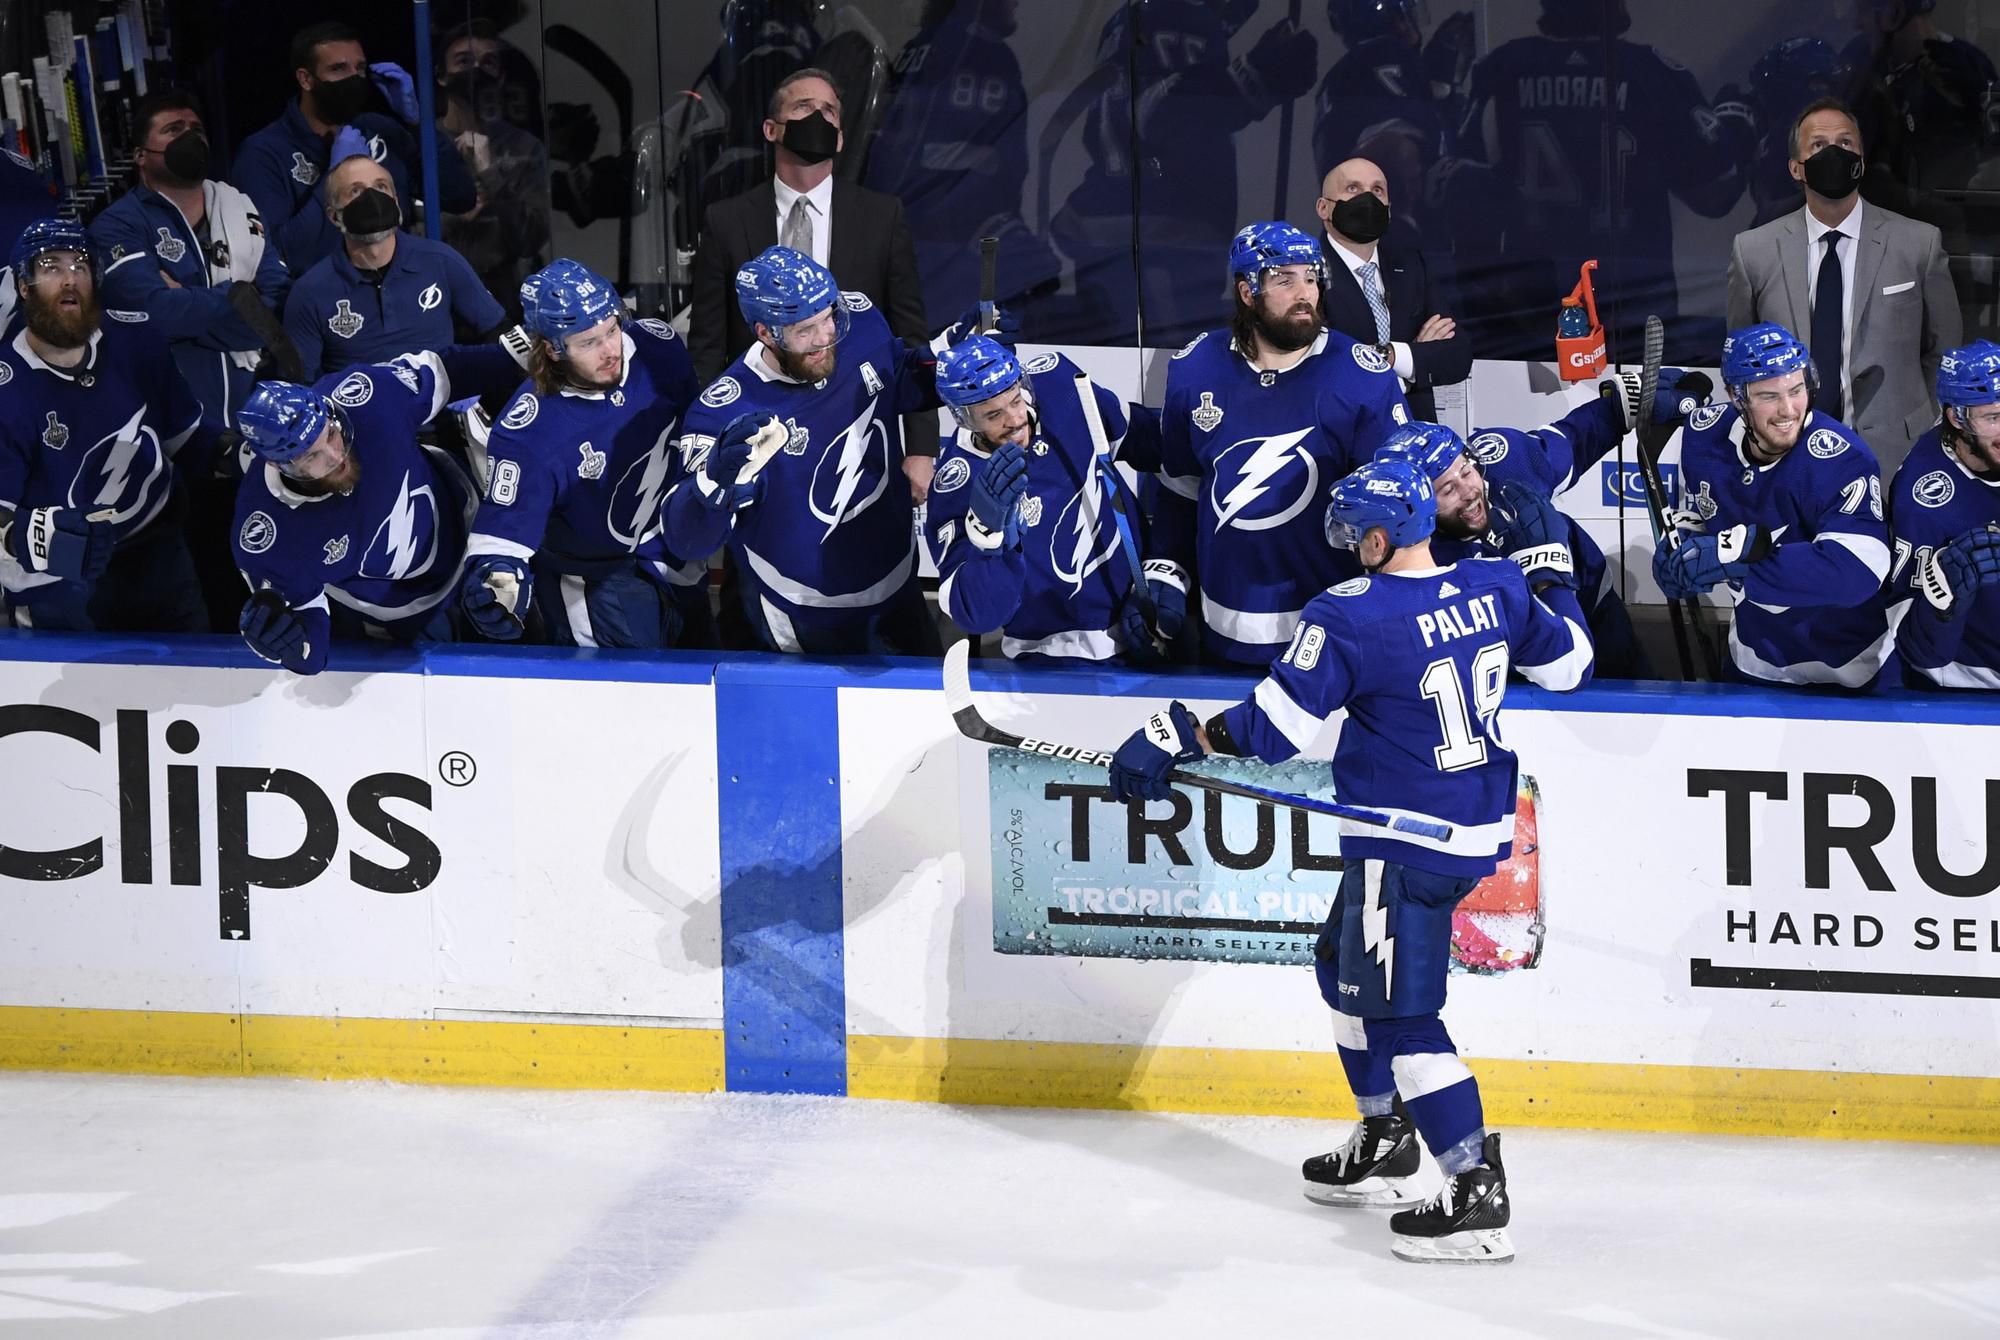 Finále play-off: Tampa Bay Lightning - Montreal Canadiens.